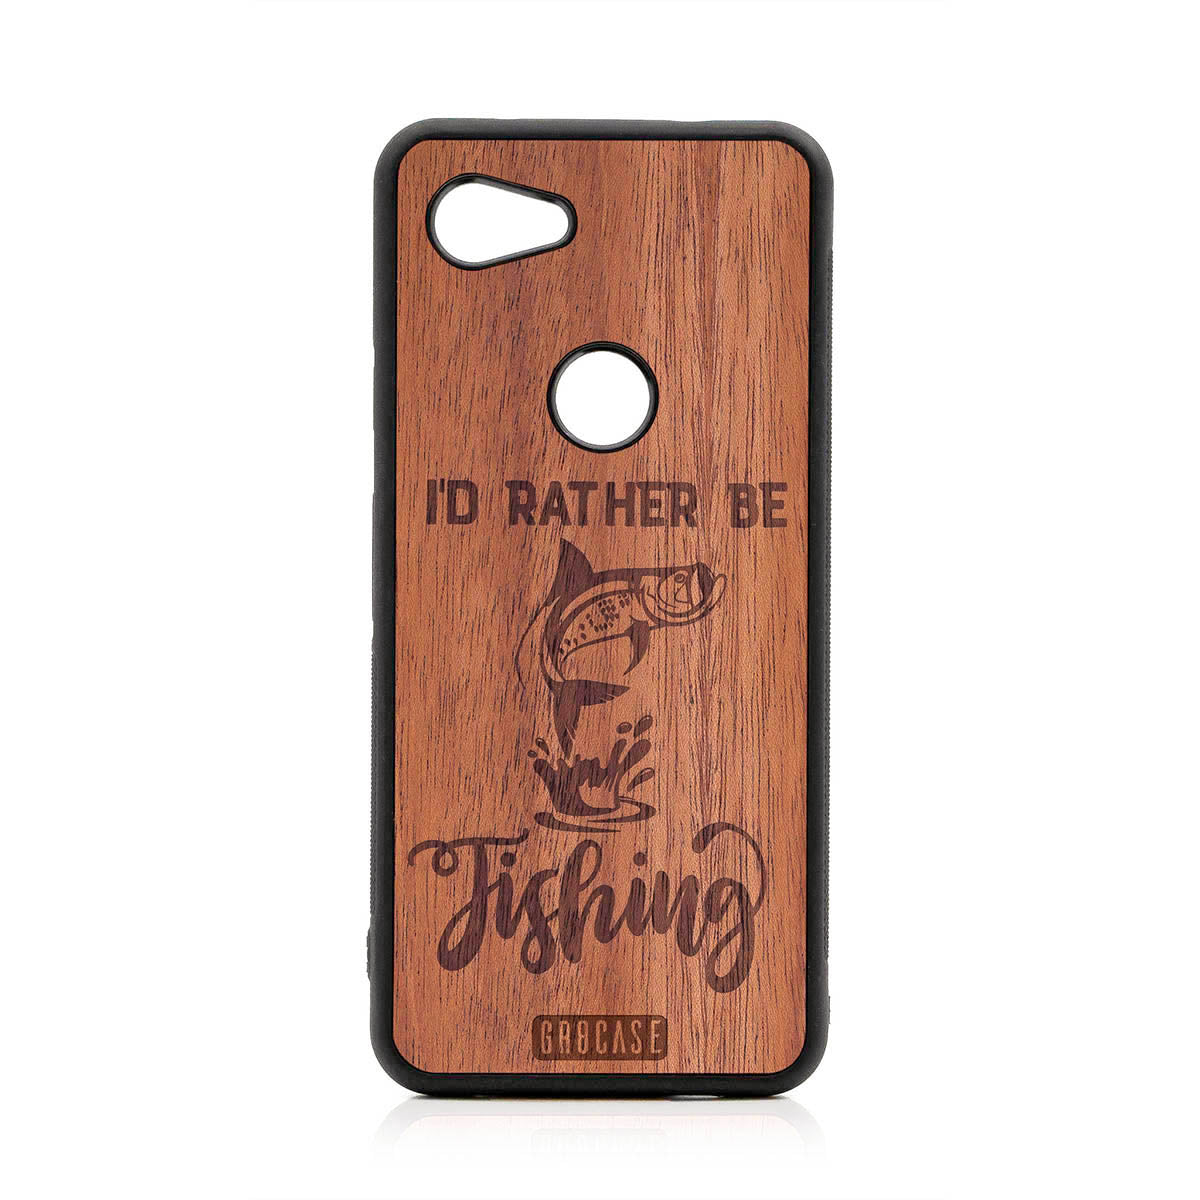 I'D Rather Be Fishing Design Wood Case For Google Pixel 3A XL